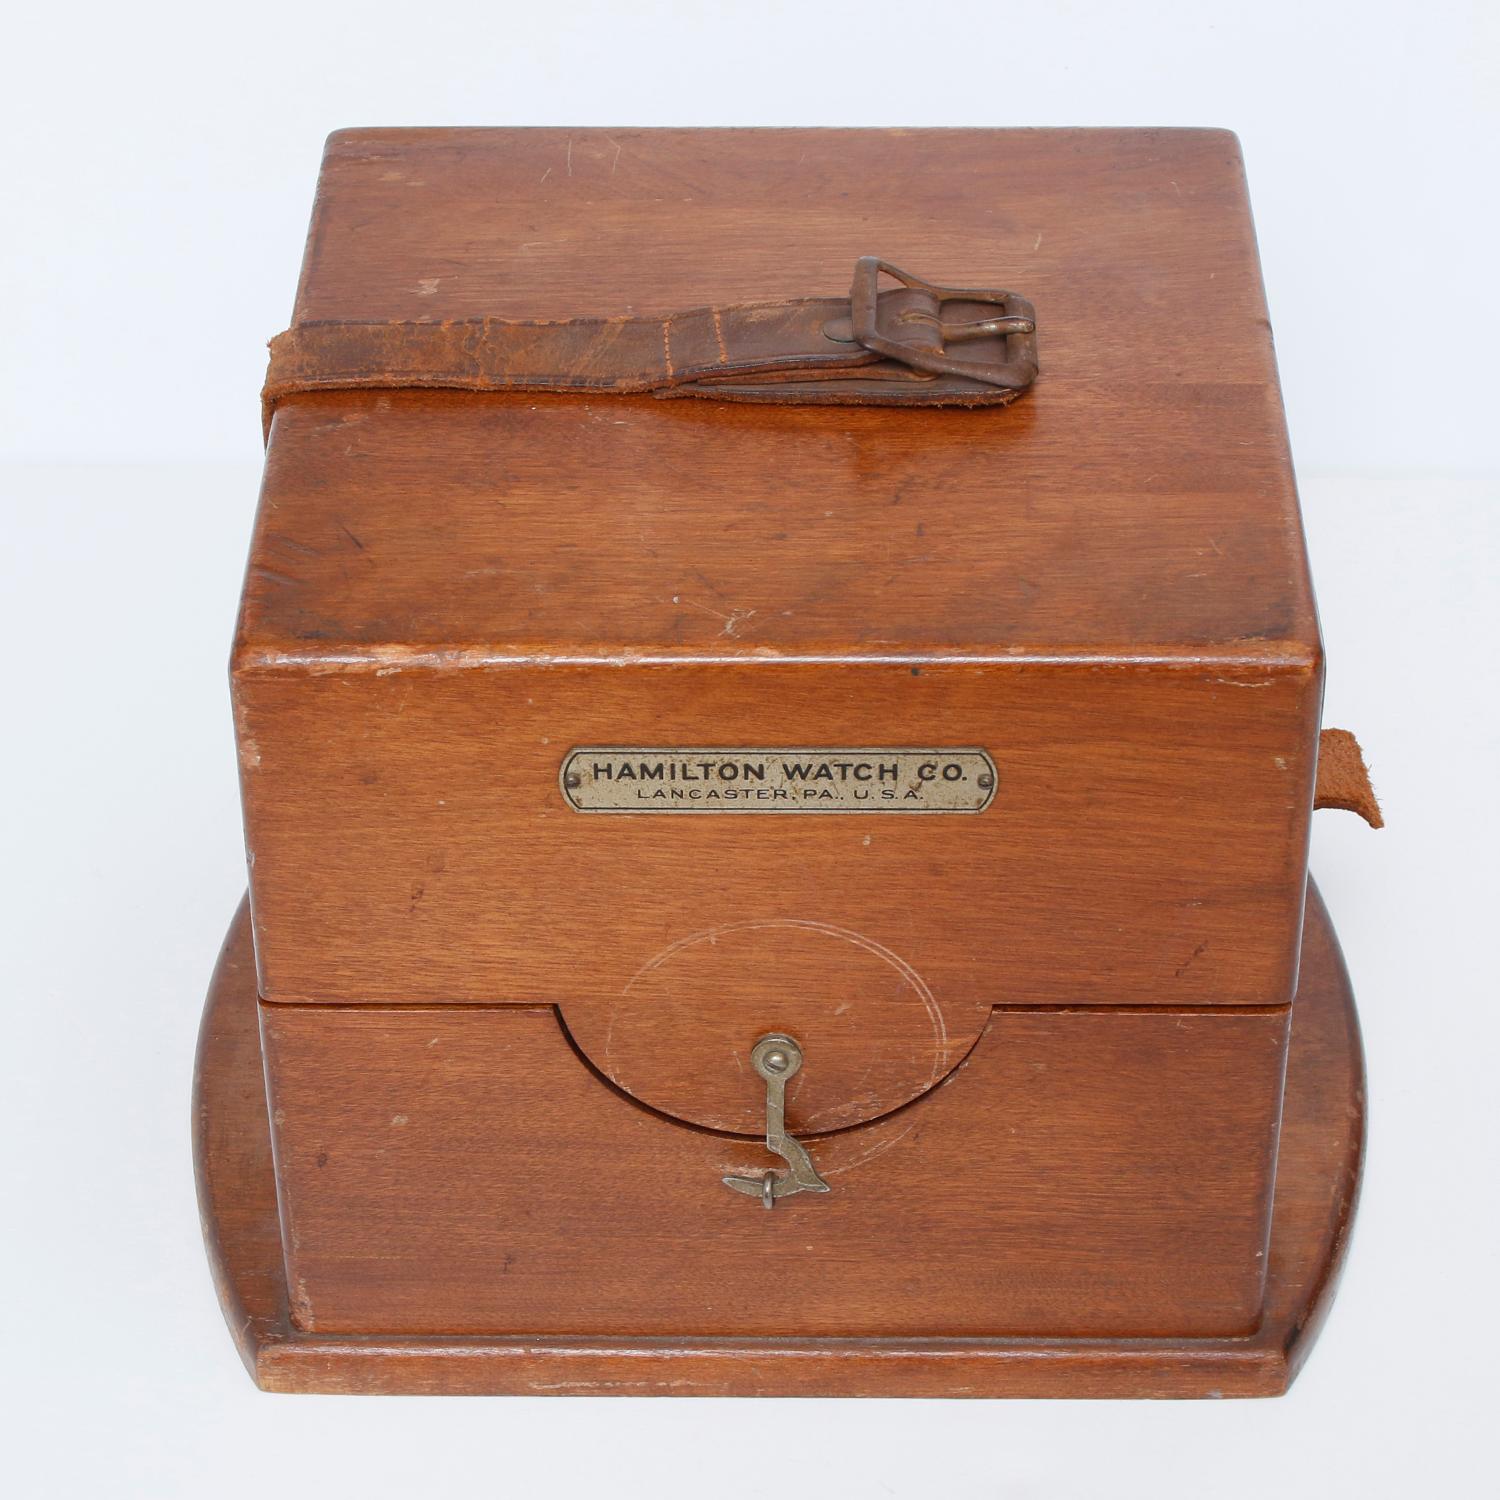 US Navy Mounted Hamilton Model 22 Bureau of  Ships Chronometer - Manual winding; Chronometer. Brass case with inscription in the back 